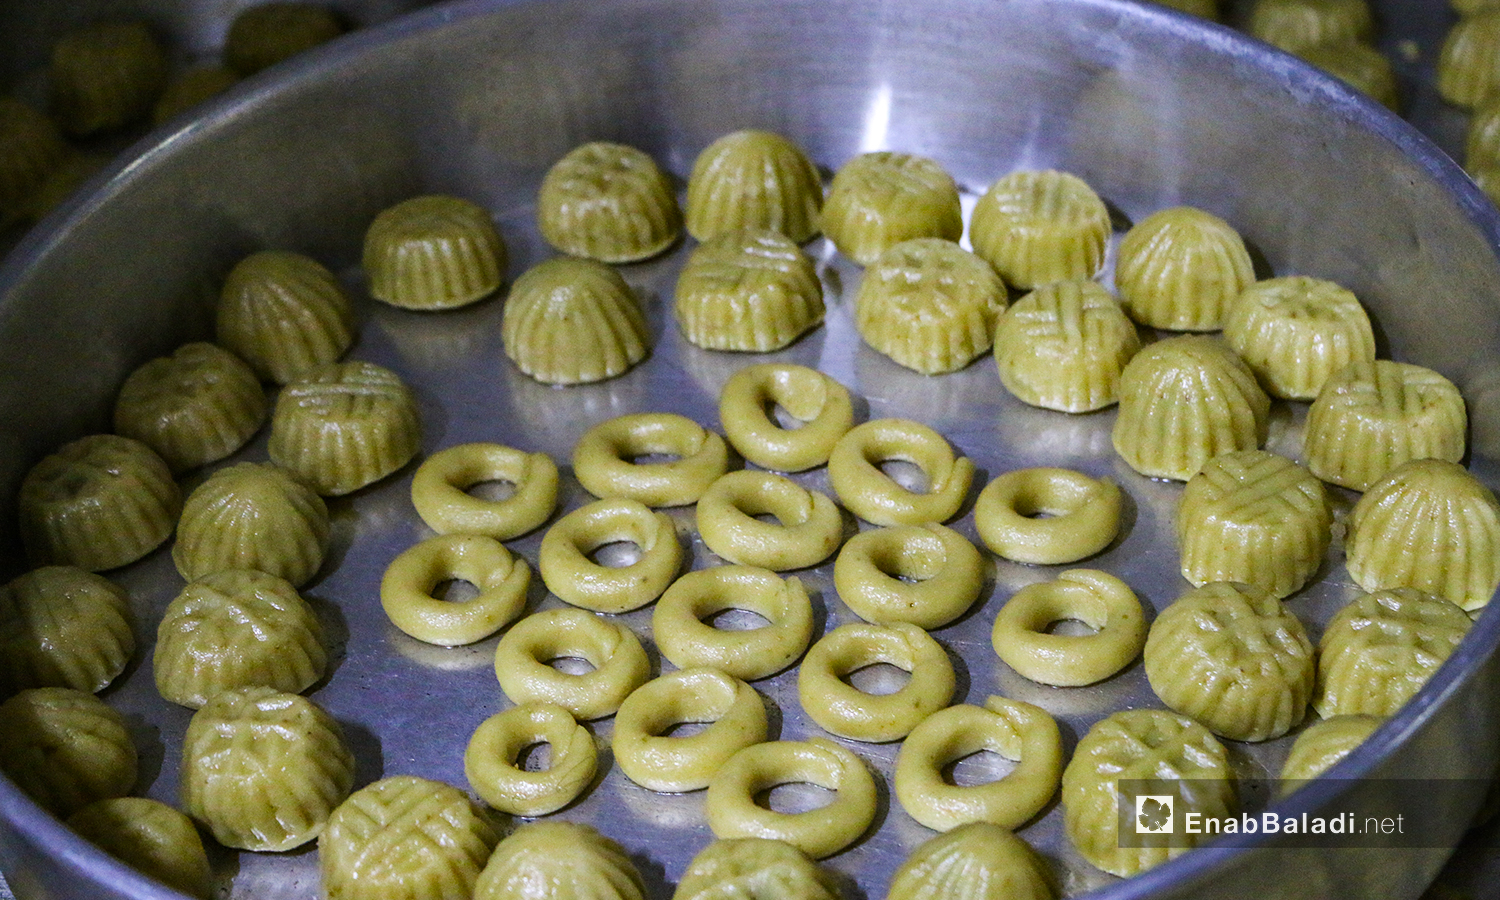 The preparation of home-made traditional Eid sweets in one of Dabiq townhouses in northern Aleppo countryside – 30 July 2020 (Enab Baladi / Abdul Salam Majan)